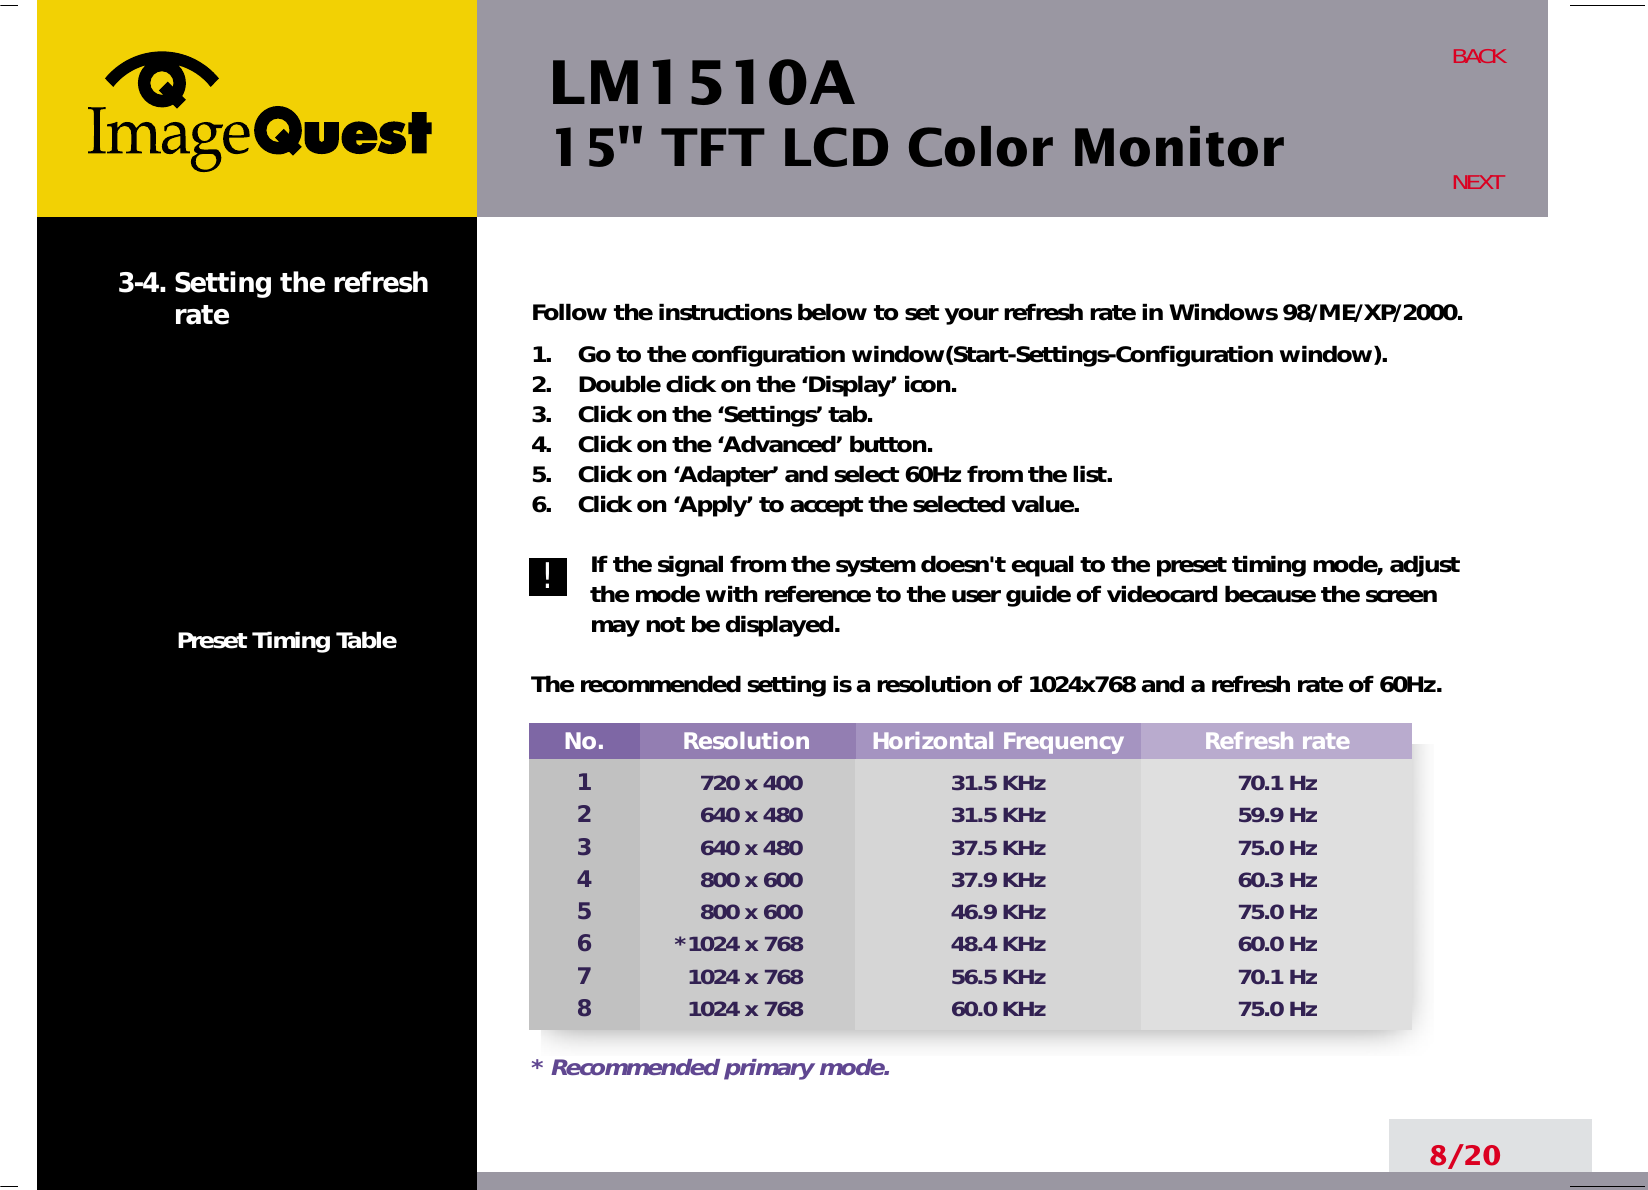 LM1510A15&quot; TFT LCD Color Monitor8/20BACKNEXT3-4. Setting the refreshratePreset Timing TableNo.12345678Resolution720 x 400640 x 480640 x 480800 x 600800 x 600*1024 x 7681024 x 7681024 x 768Horizontal Frequency31.5 KHz31.5 KHz37.5 KHz37.9 KHz46.9 KHz48.4 KHz56.5 KHz60.0 KHzRefresh rate70.1 Hz59.9 Hz75.0 Hz60.3 Hz75.0 Hz60.0 Hz70.1 Hz75.0 Hz* Recommended primary mode.!Follow the instructions below to set your refresh rate in Windows 98/ME/XP/2000.1.    Go to the configuration window(Start-Settings-Configuration window).2.    Double click on the ‘Display’ icon.3.    Click on the ‘Settings’ tab.4.    Click on the ‘Advanced’ button.5.    Click on ‘Adapter’ and select 60Hz from the list.6.    Click on ‘Apply’ to accept the selected value.If the signal from the system doesn&apos;t equal to the preset timing mode, adjustthe mode with reference to the user guide of videocard because the screenmay not be displayed.The recommended setting is a resolution of 1024x768 and a refresh rate of 60Hz.